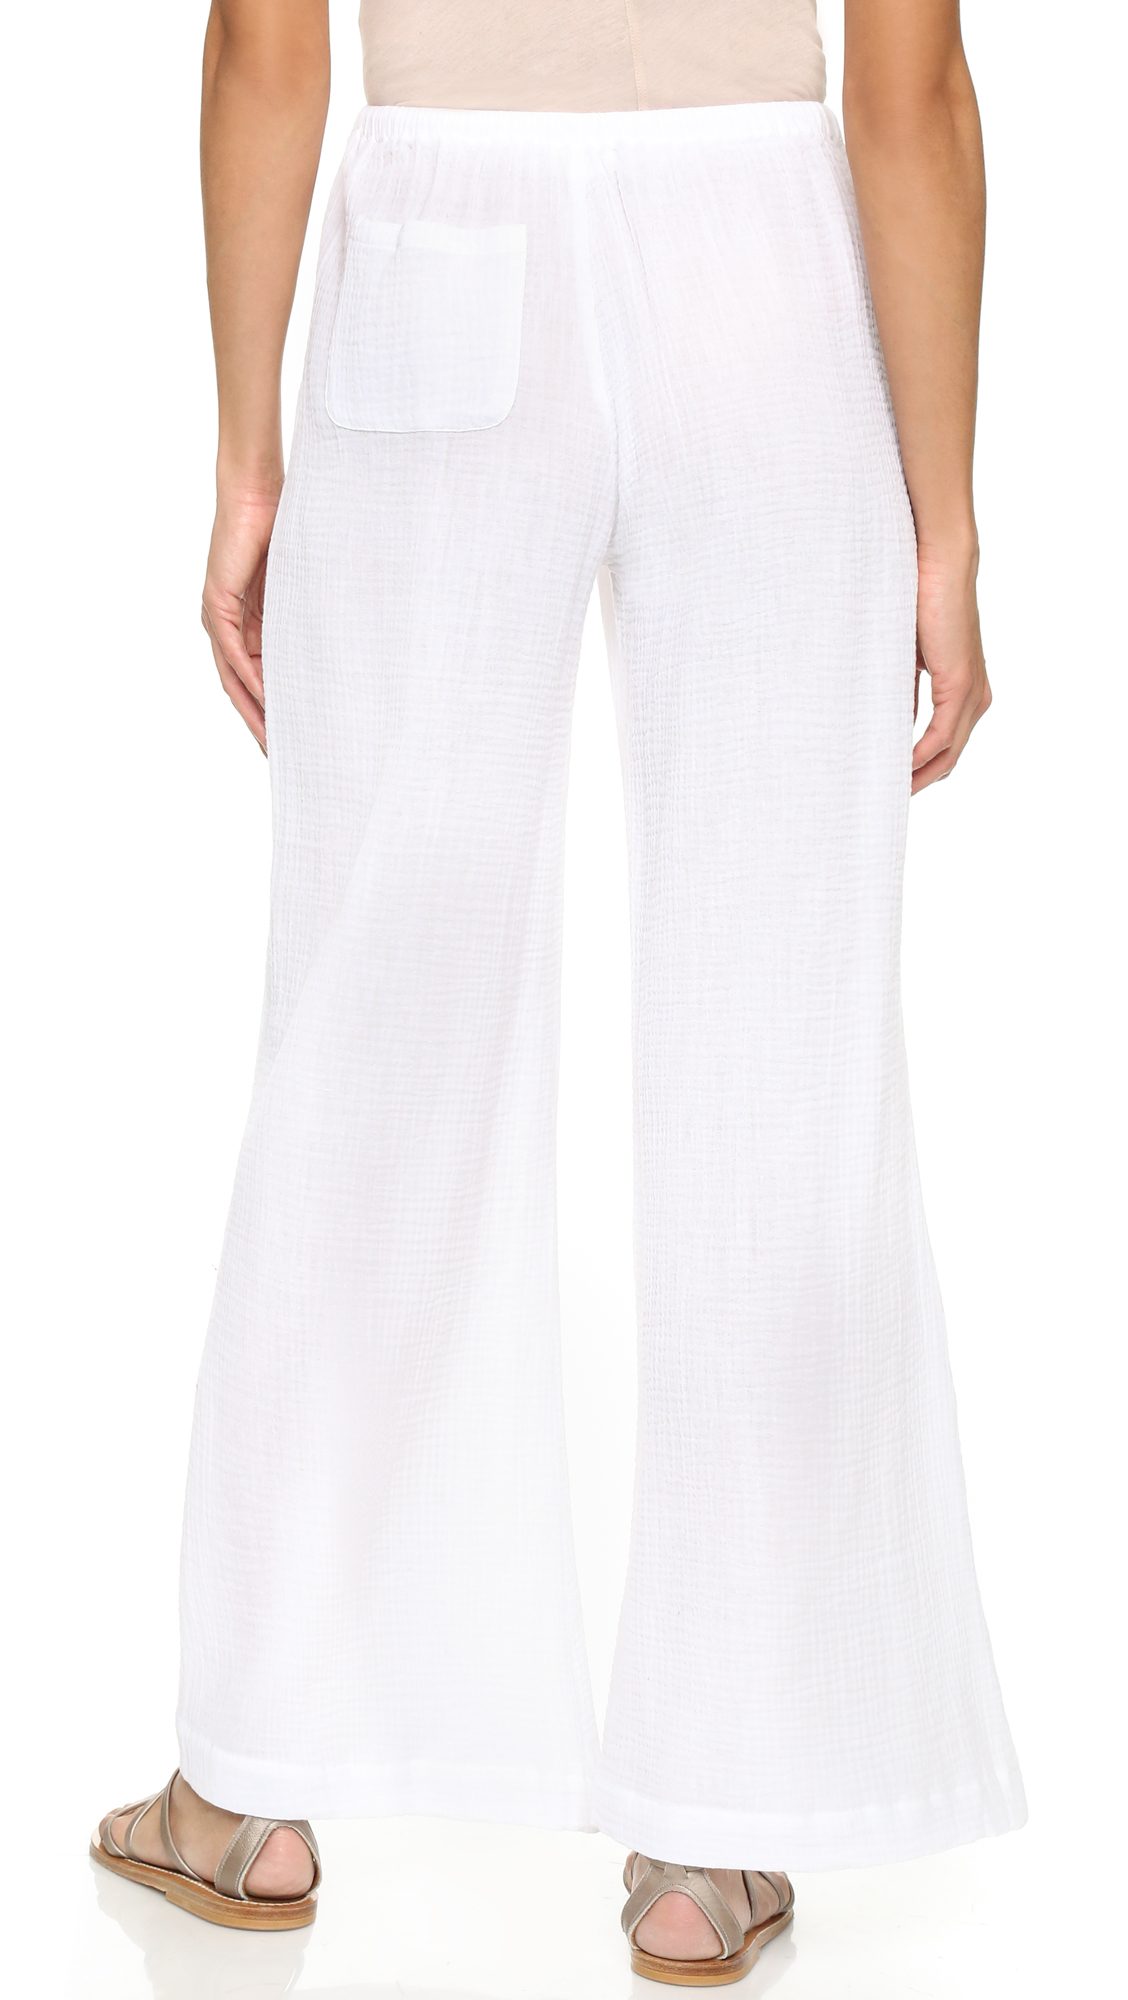 Skin Cotton Palazzo Pants in White - Lyst